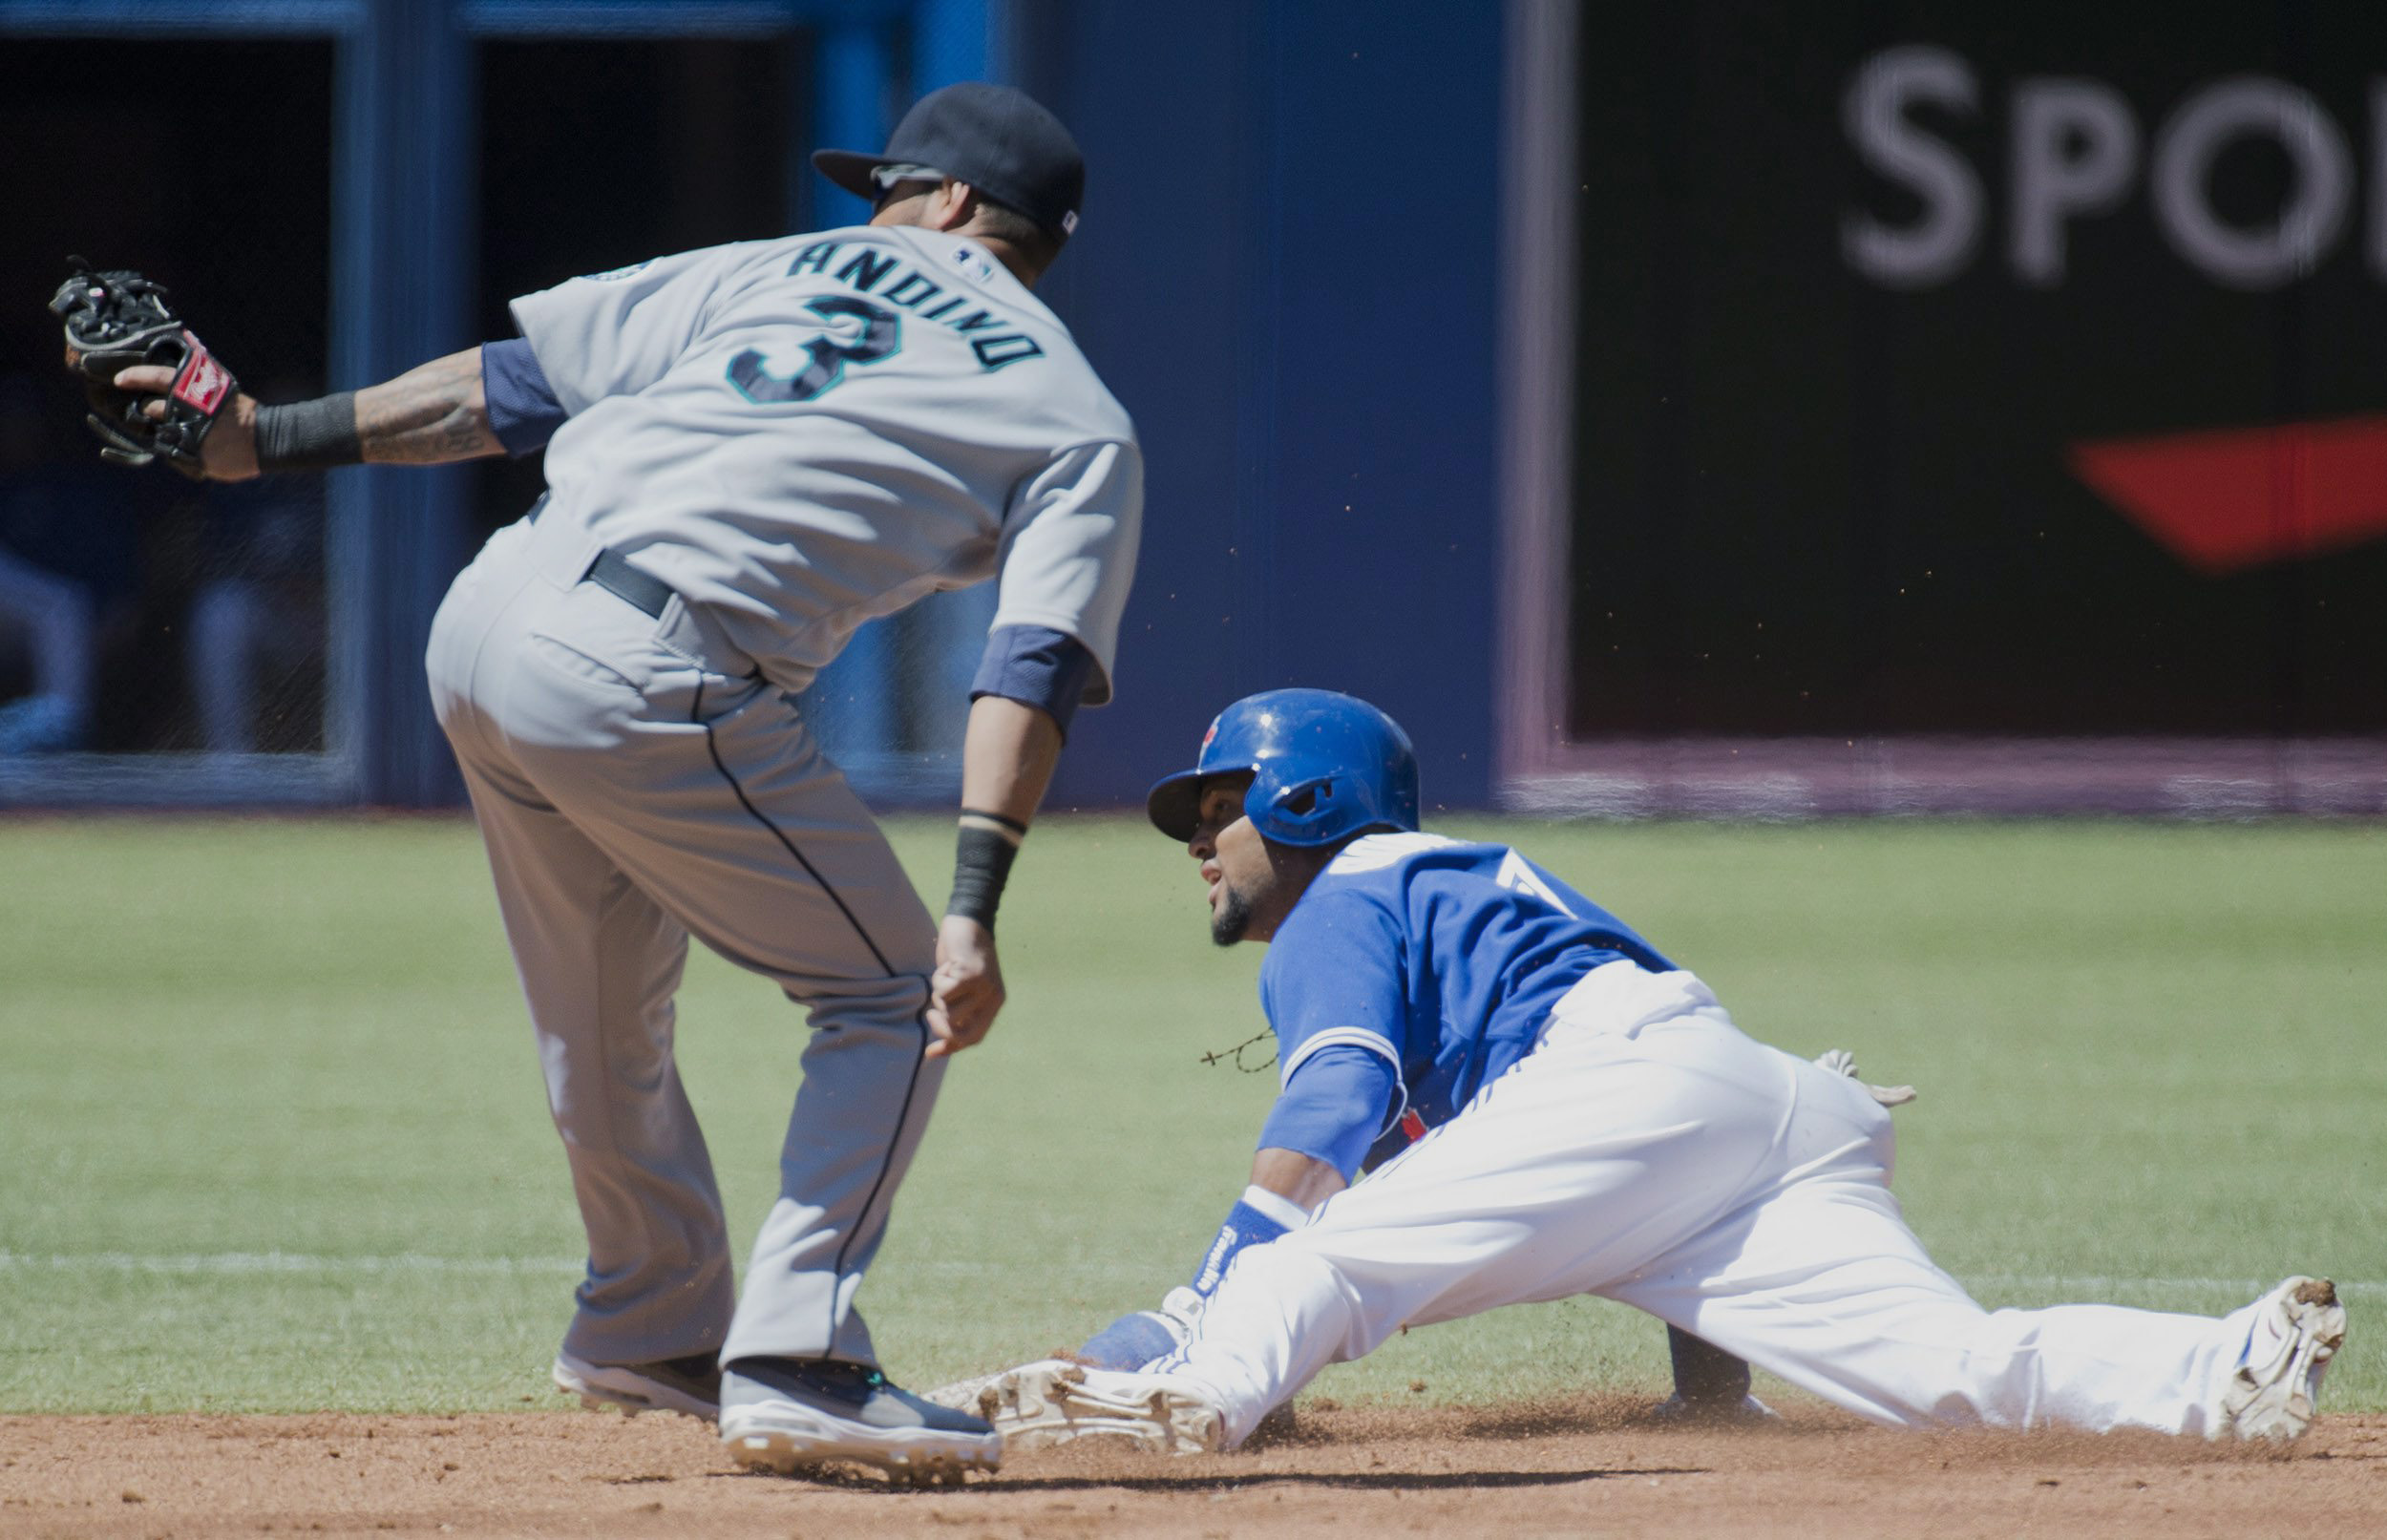 Toronto's Emilio Bonifacio, right, steals second base as Seattle shortstop Robert Andino, left, is late on the tag during second inning Sunday.